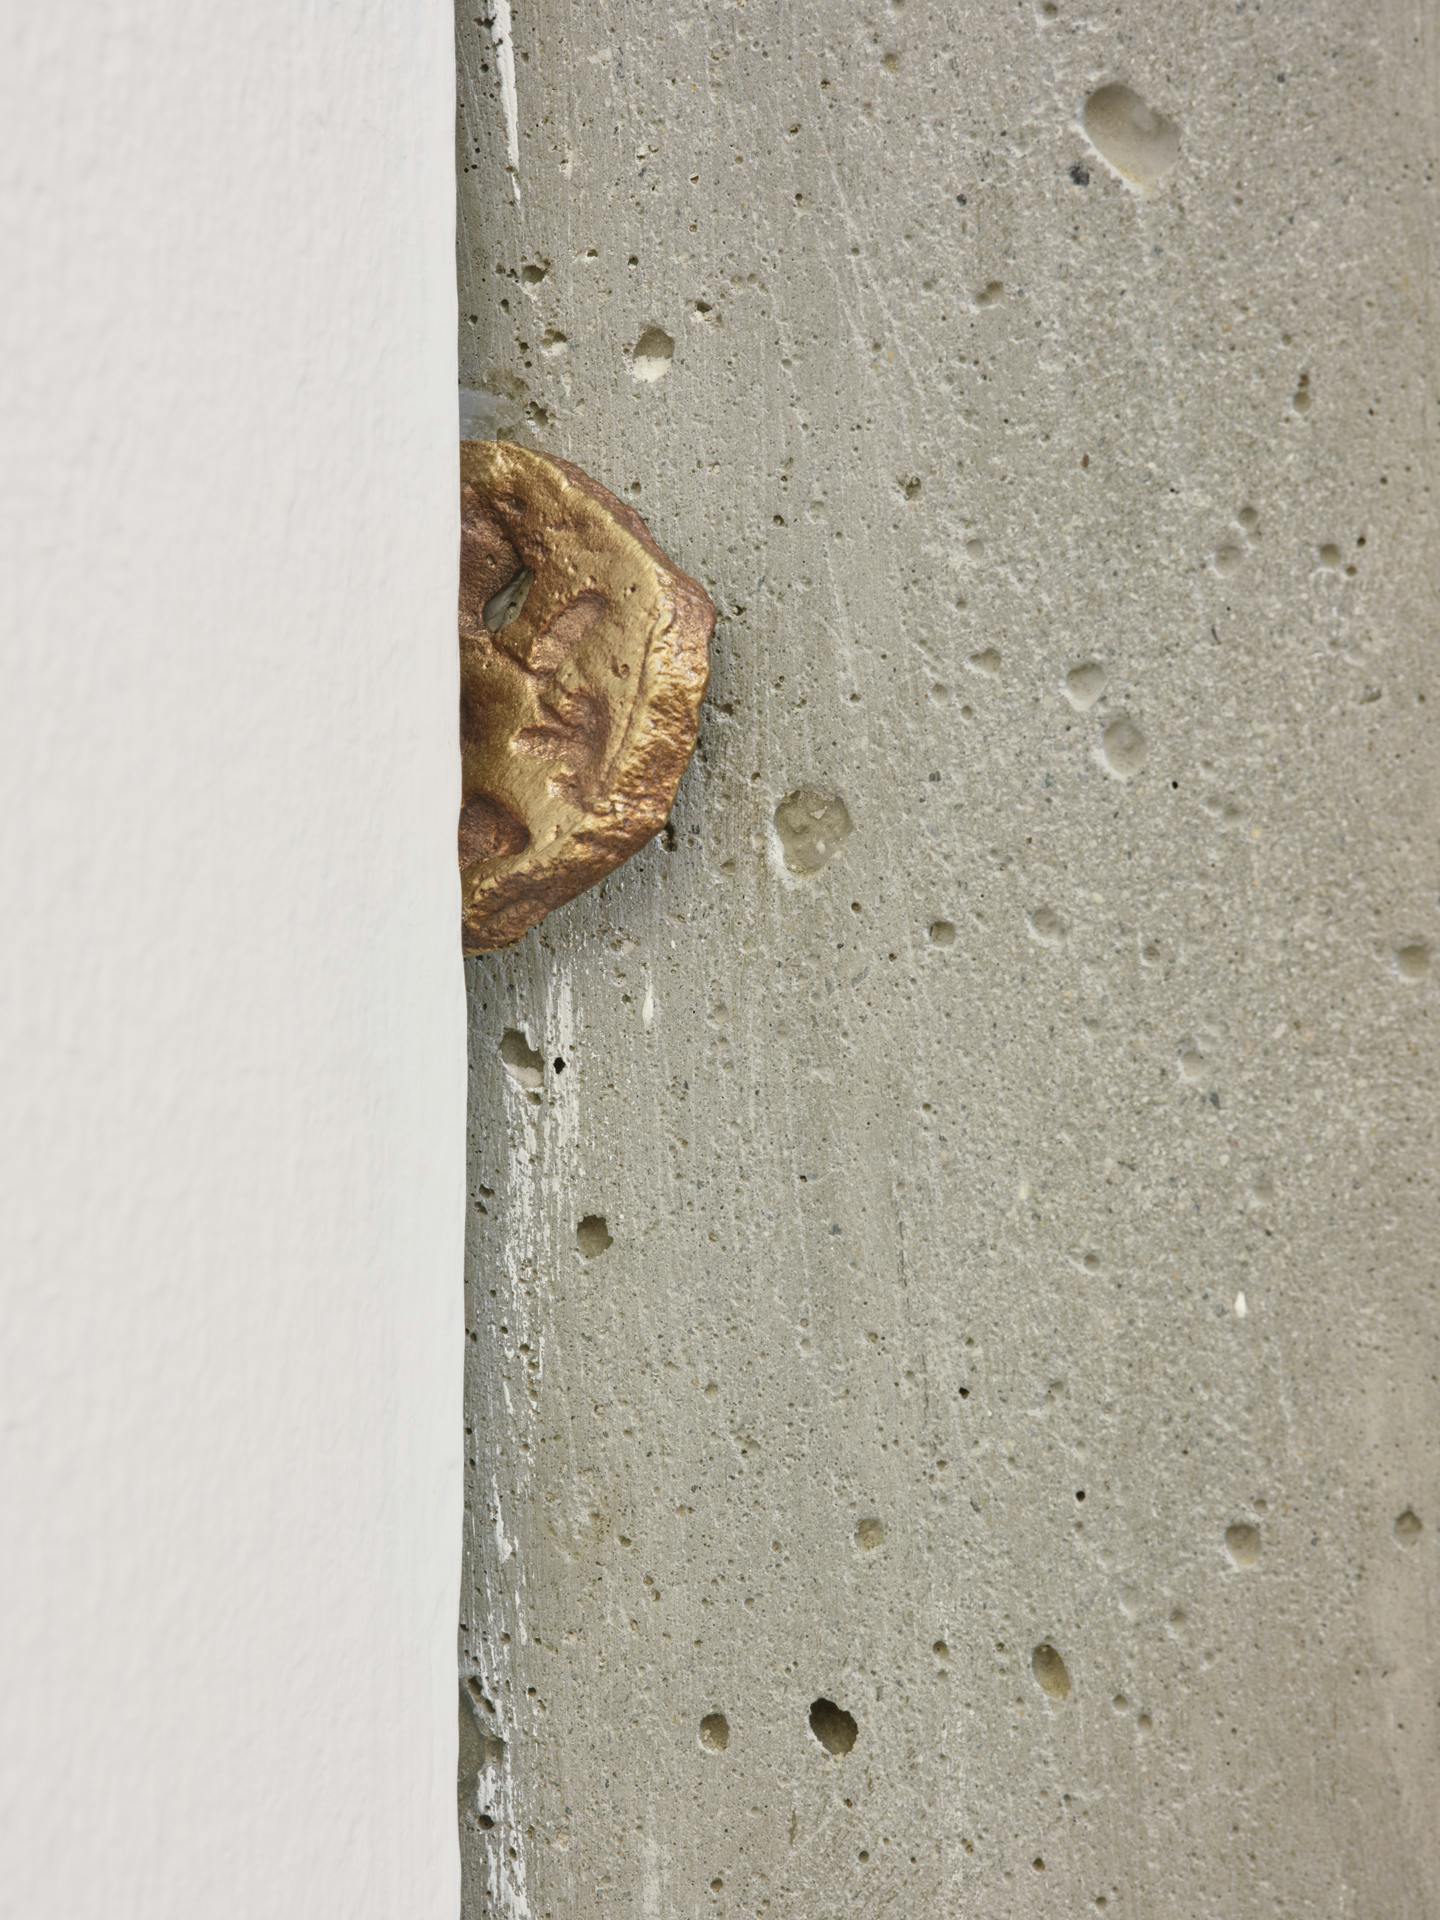 A small gold sculpture resembling a lotus root is wedged between a cement wall and white drywall.